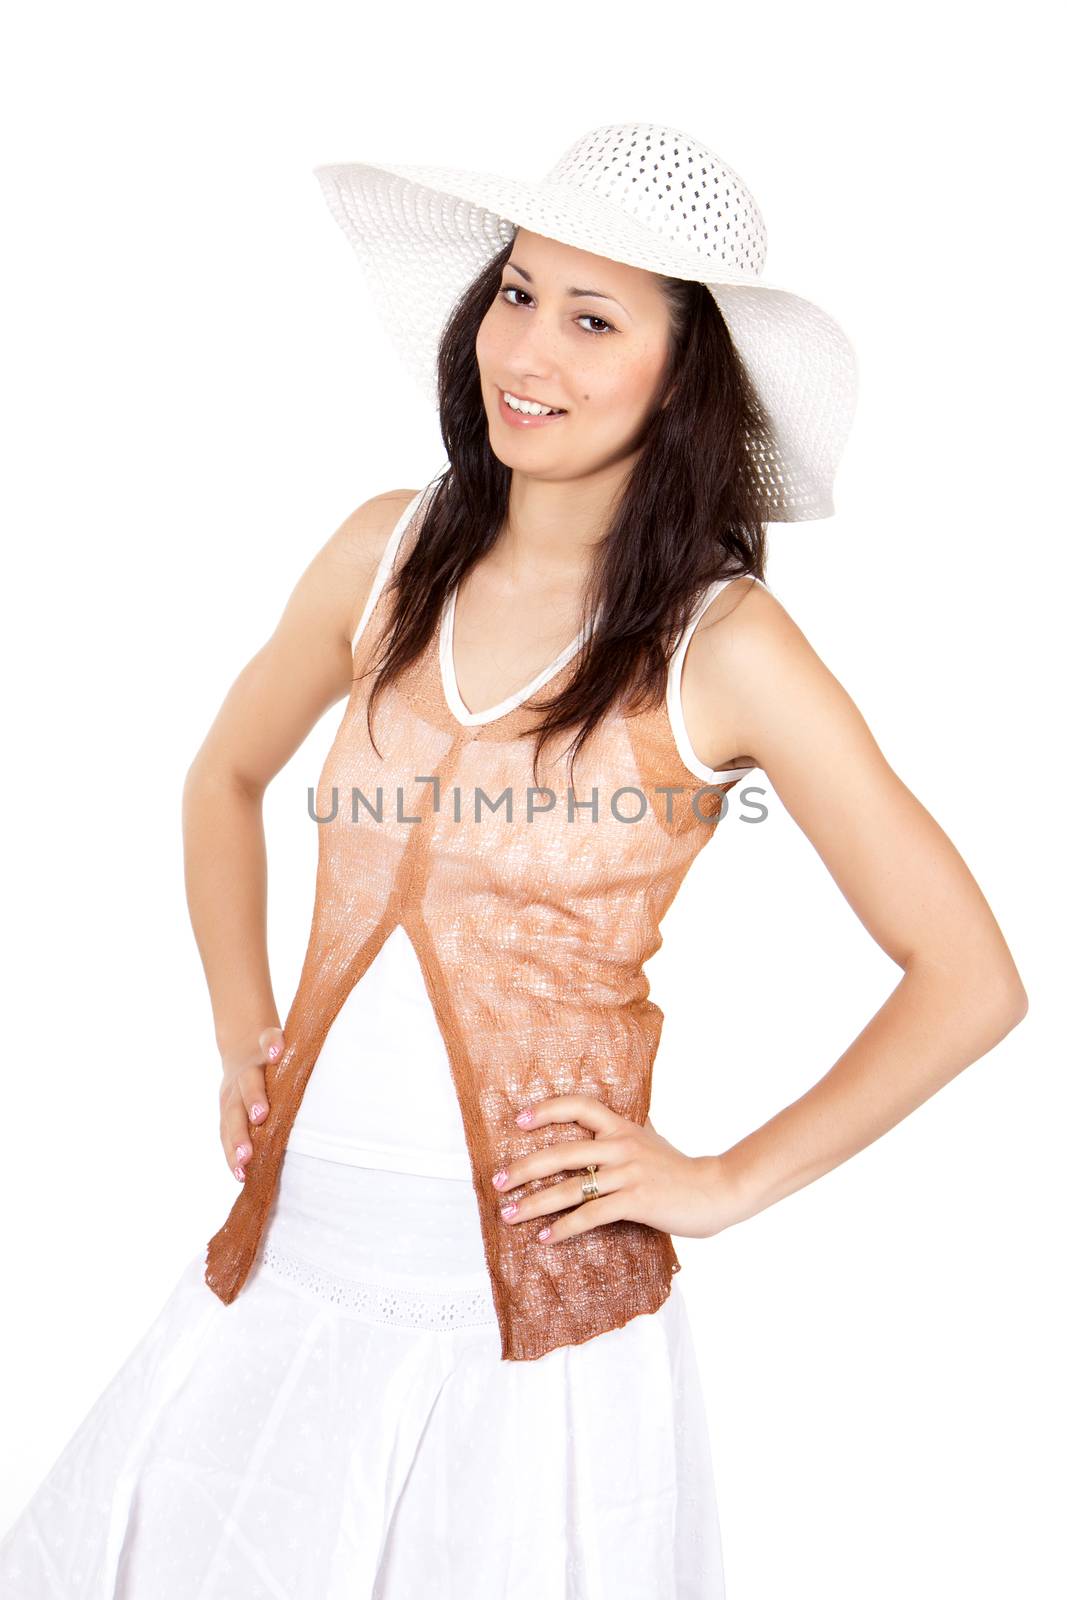 Brunette woman in white sun hat in a white dress, on white background, posing with hands on hips